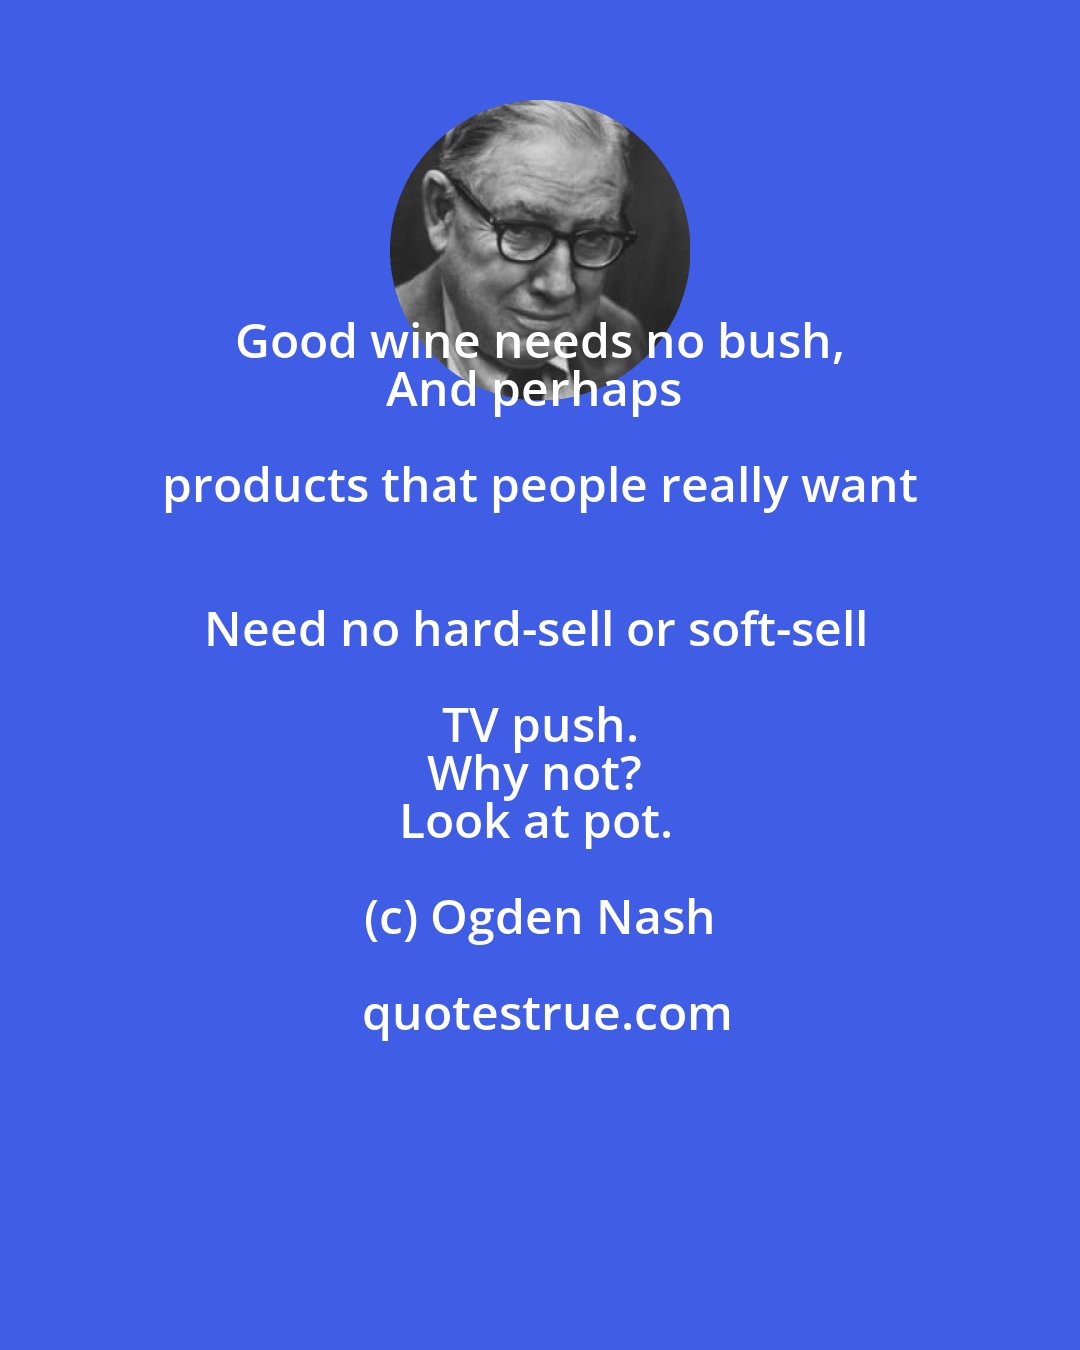 Ogden Nash: Good wine needs no bush, 
And perhaps products that people really want 
Need no hard-sell or soft-sell TV push. 
Why not? 
Look at pot.